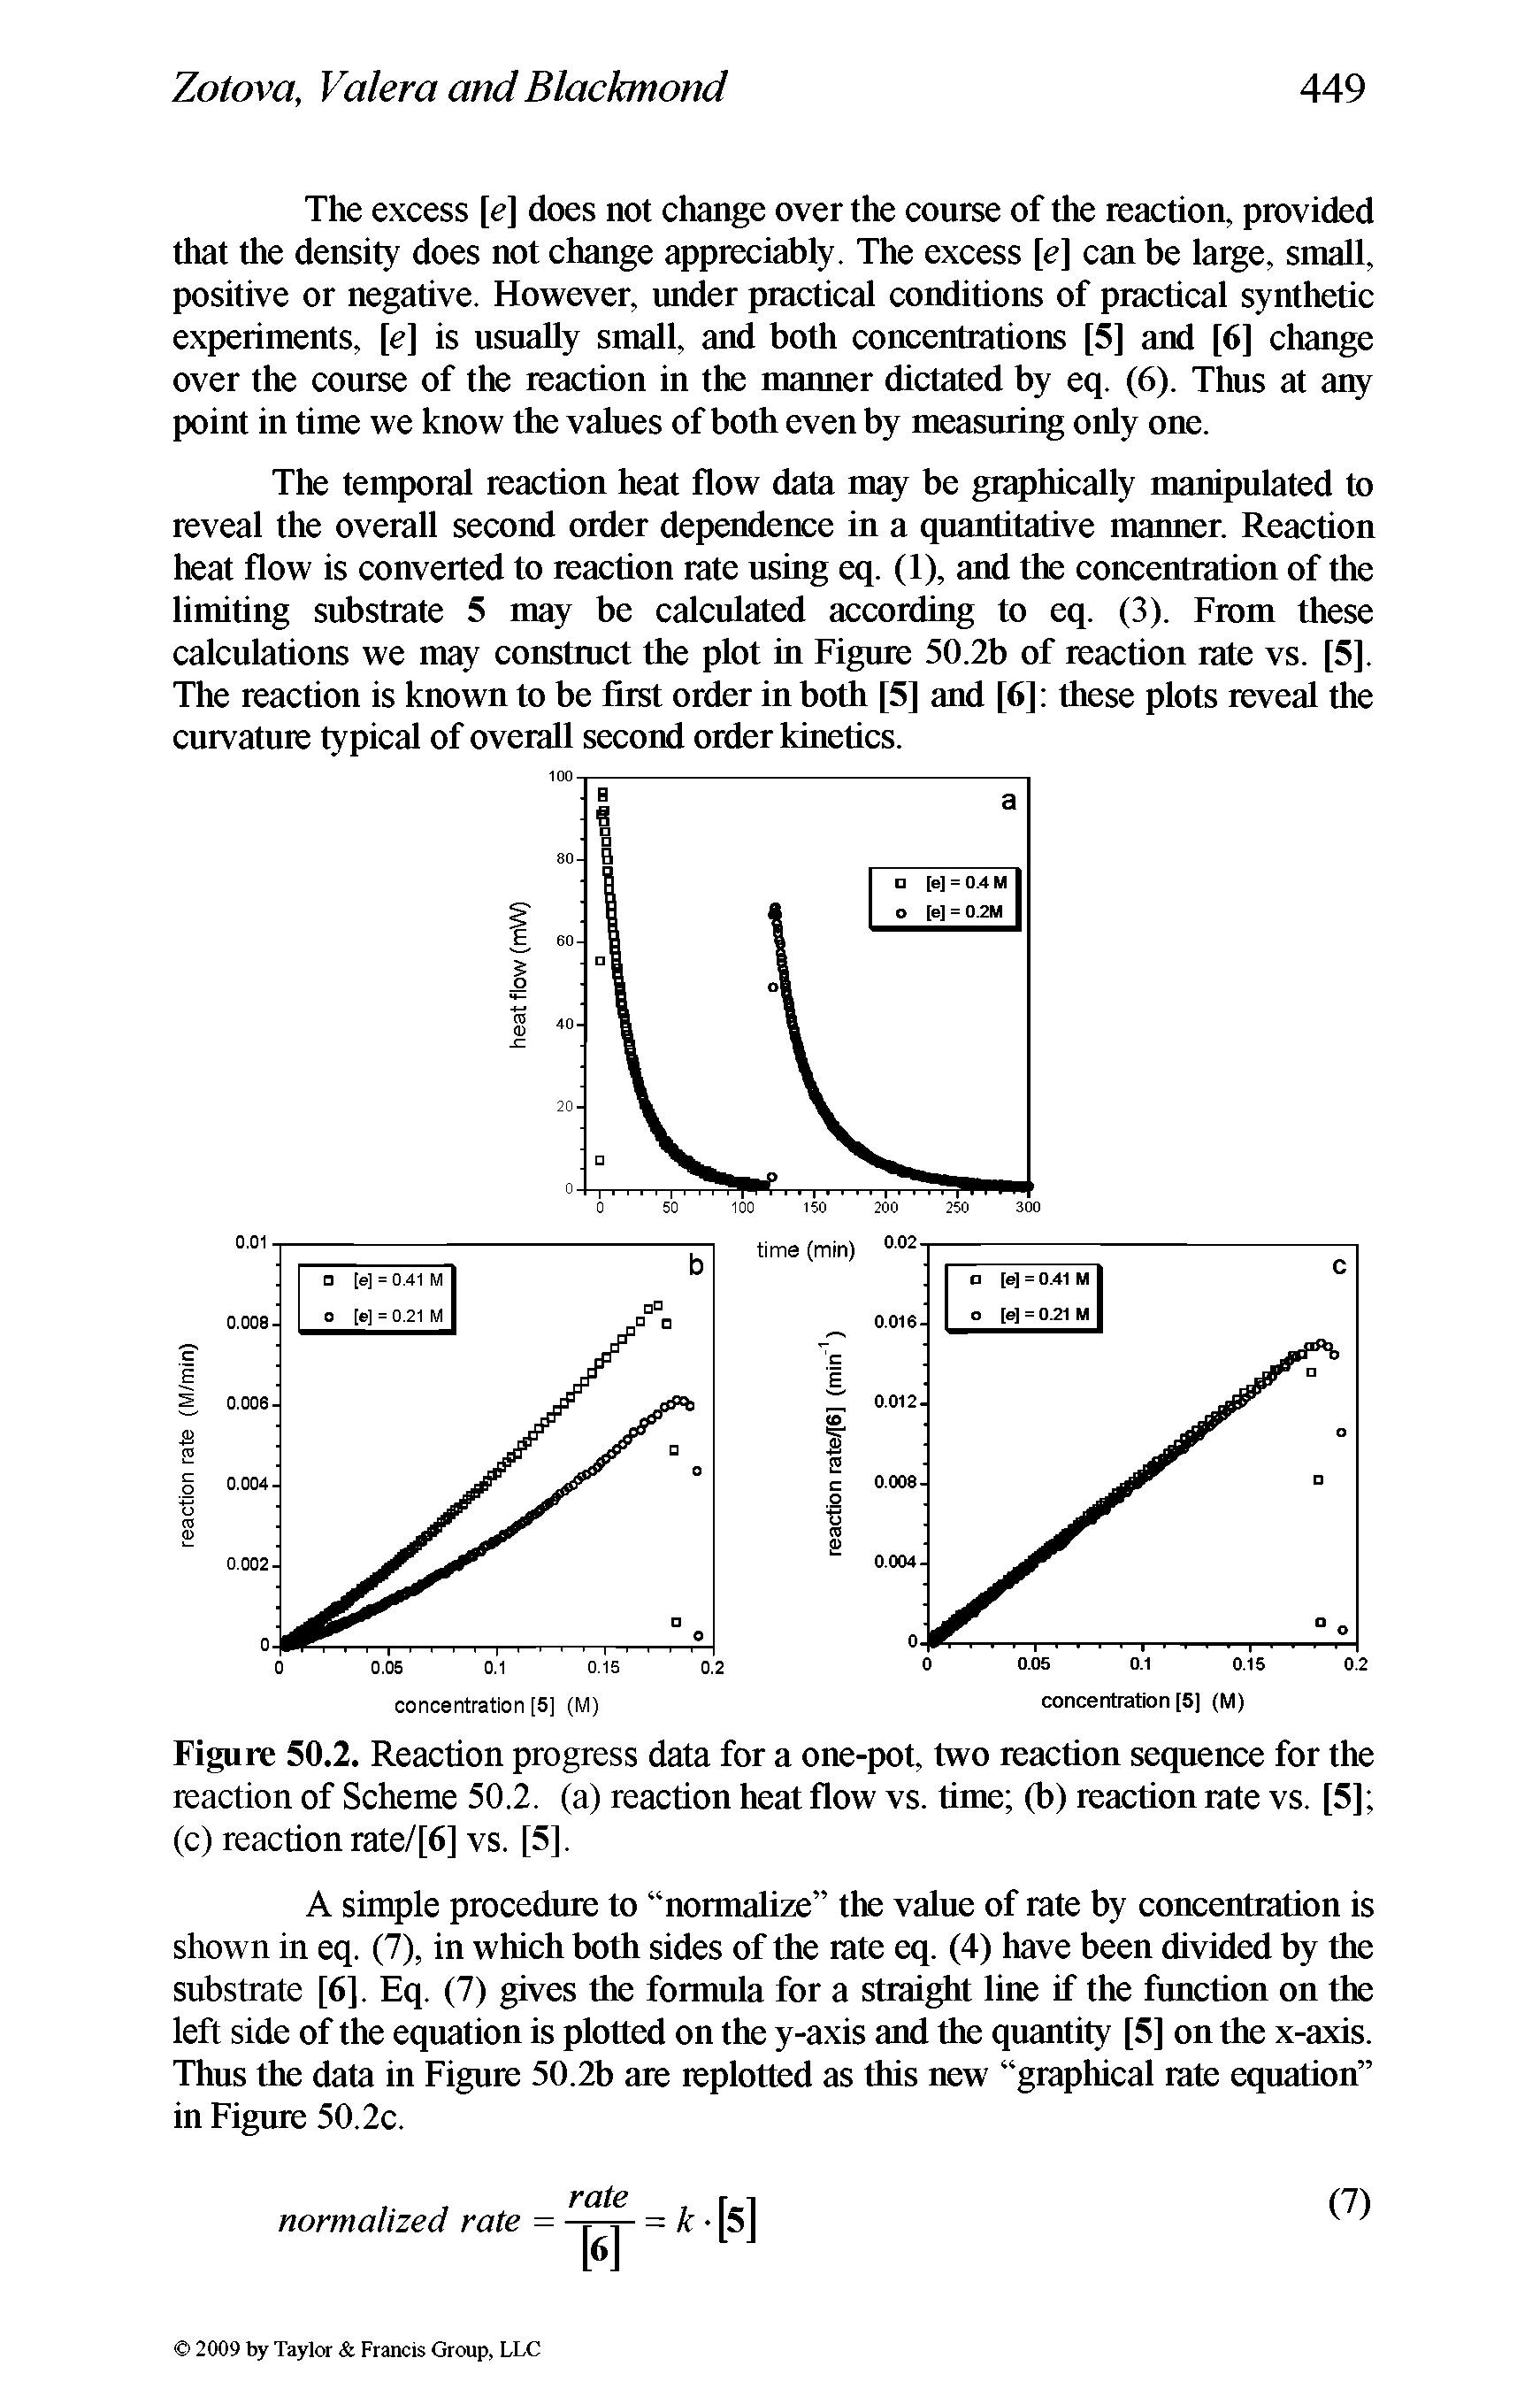 Figure 50.2. Reaction progress data for a one-pot, two reaction sequence for the reaction of Scheme 50.2. (a) reaction heat flow vs. time (b) reaction rate vs. [5] (c) reaction rate/[6] vs. [5].